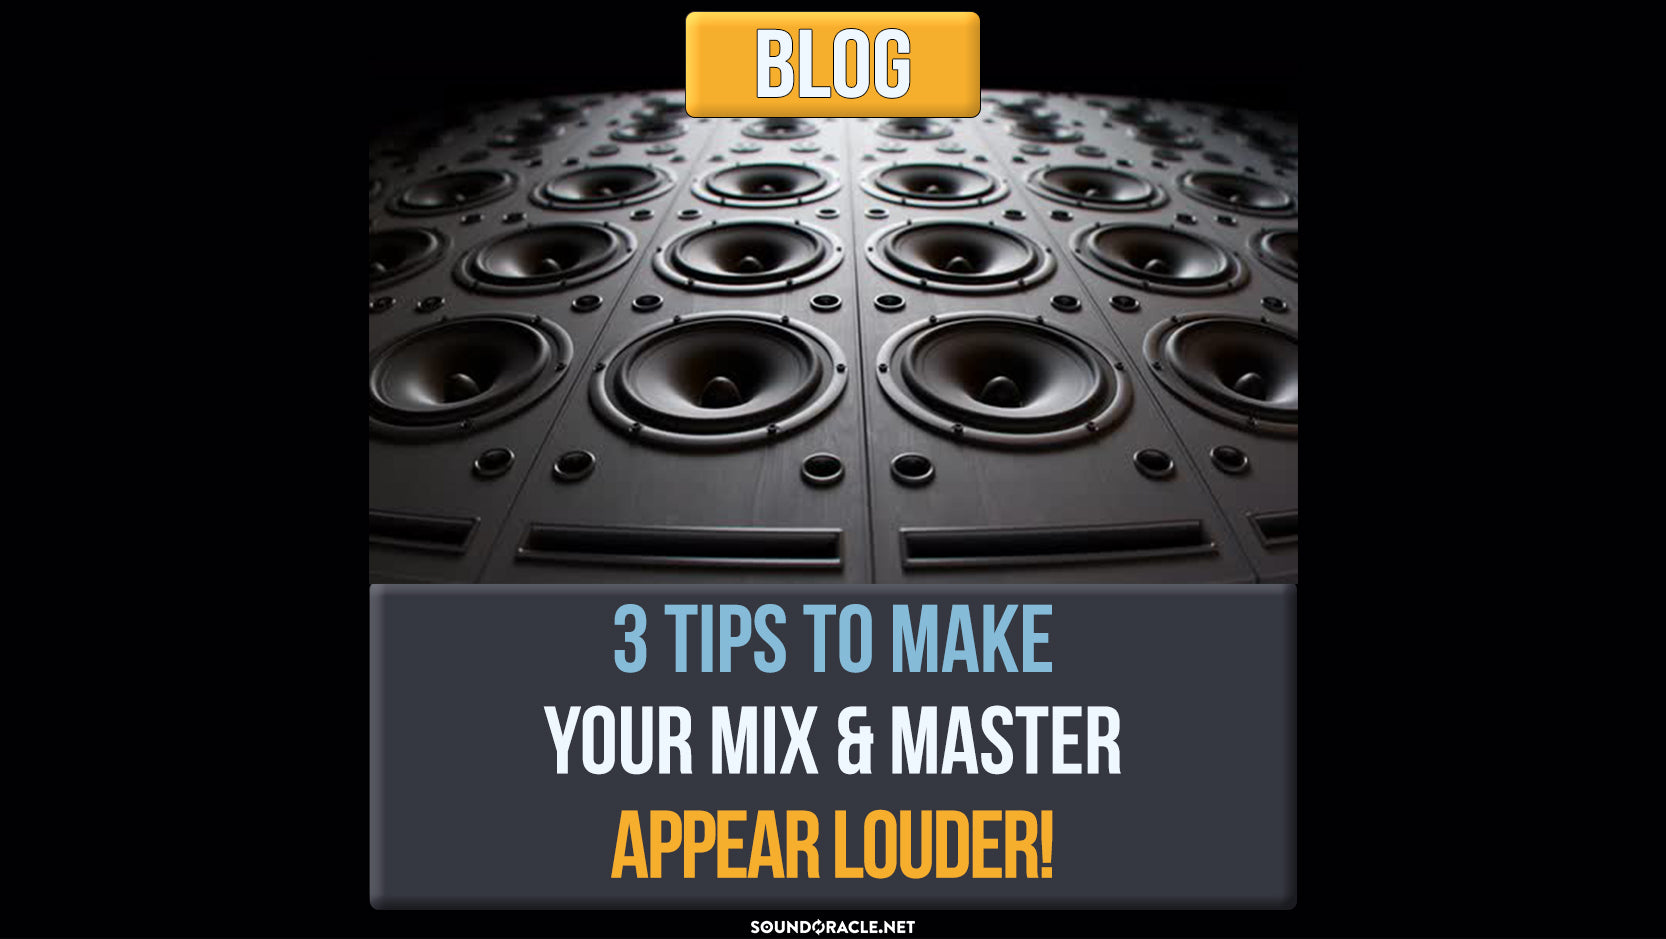 3 Tips To Make Your Mix & Master Appear Louder!